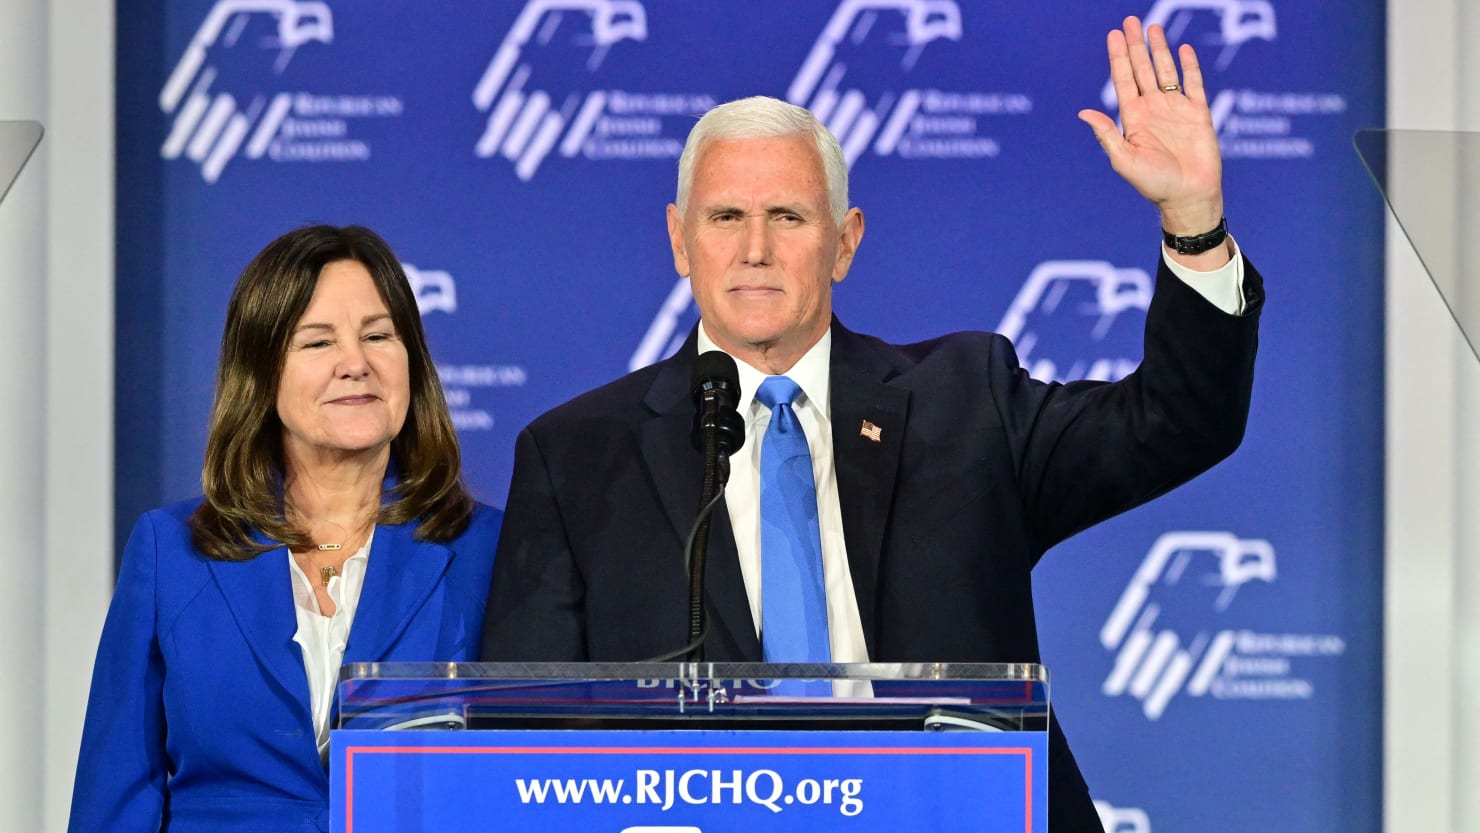 Mike Pence Makes Surprise Exit From 2024 Race at the Republican Jewish Coalition in Las Vegas - The Daily Beast